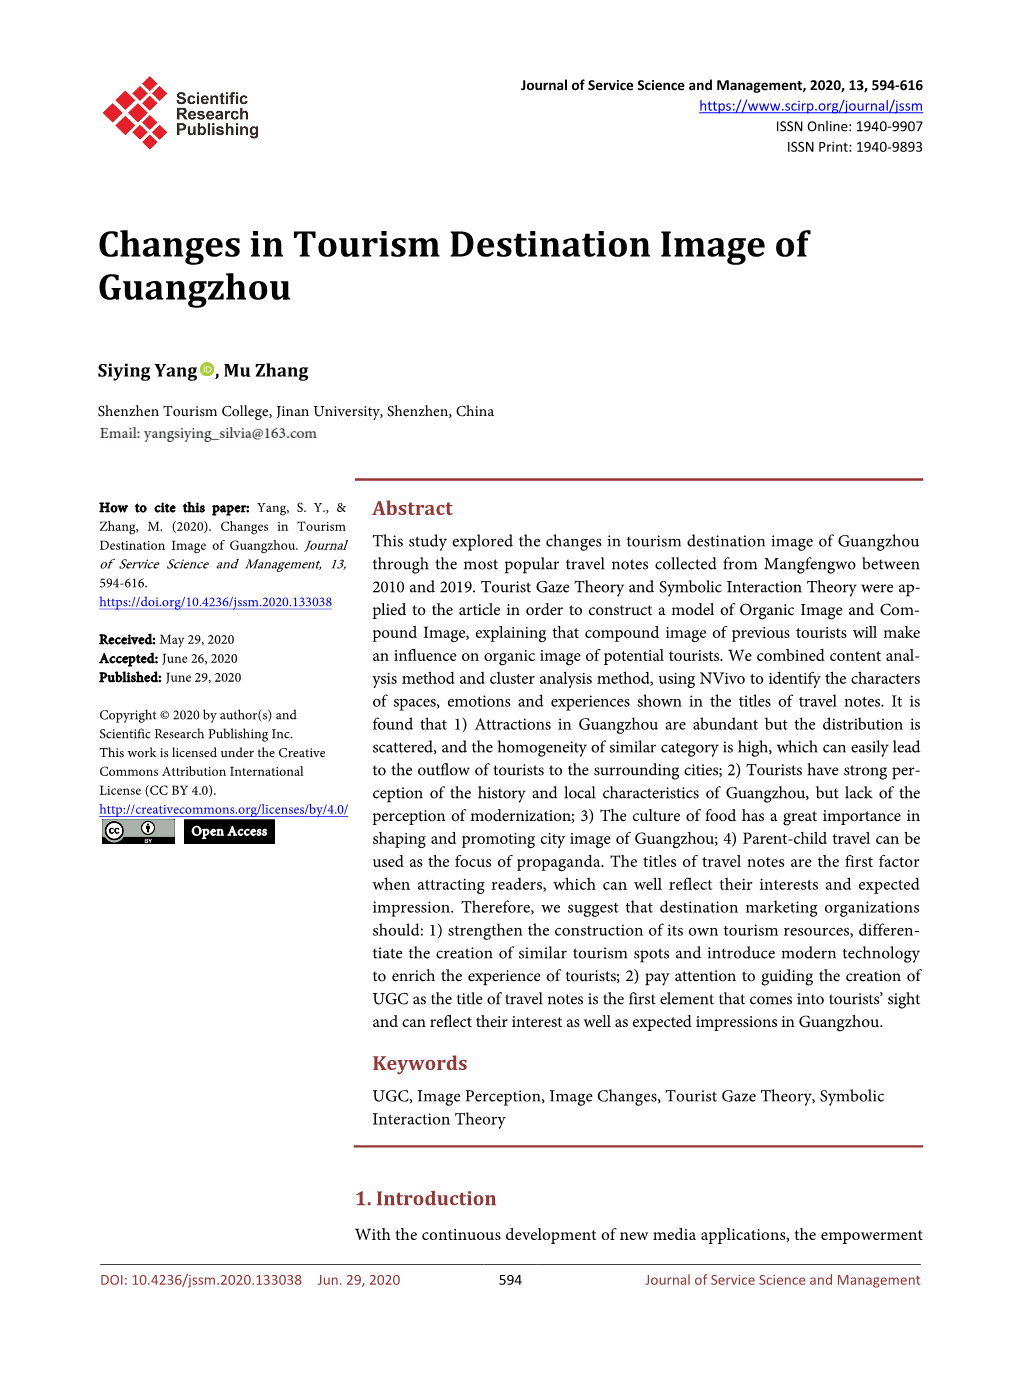 Changes in Tourism Destination Image of Guangzhou